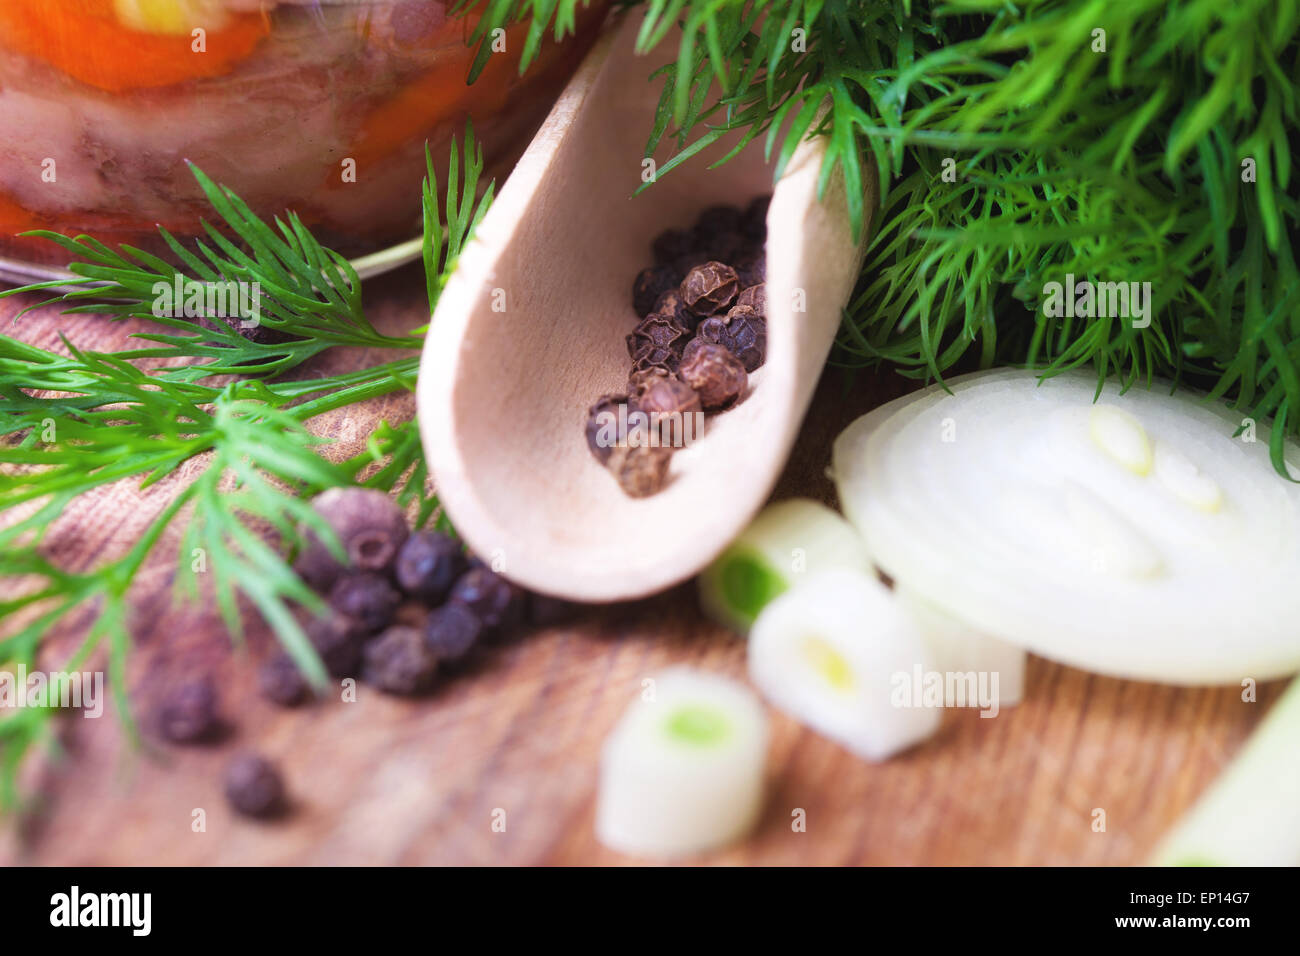 Aromatic herbs, peppers and onions on a table, close-up Stock Photo